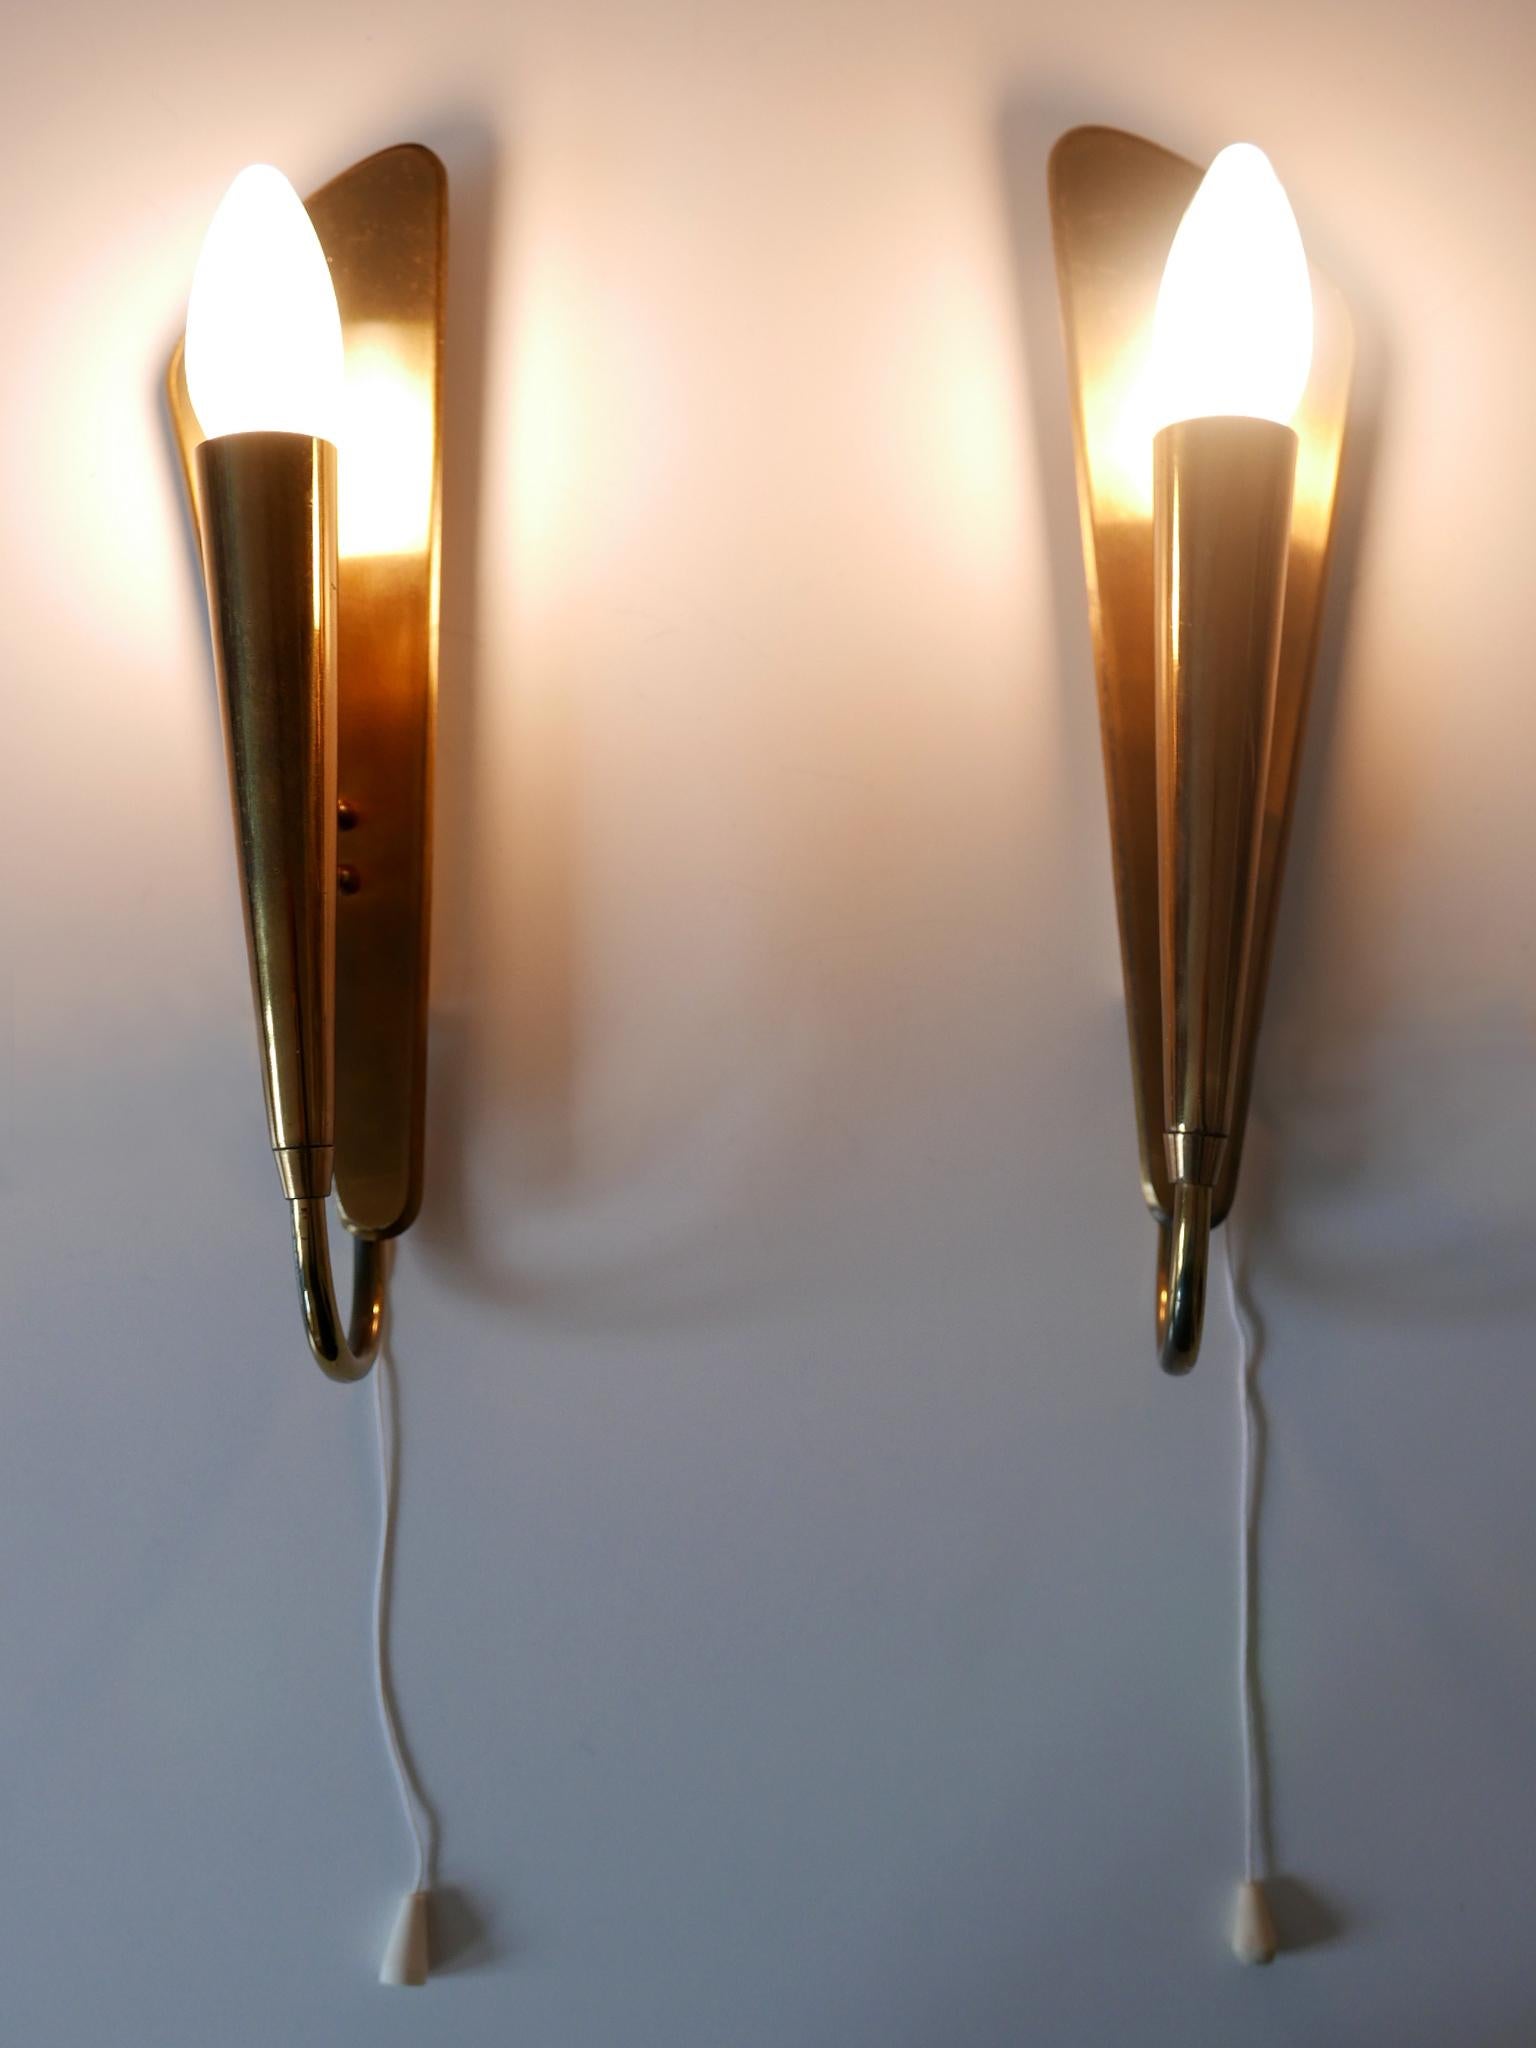 Set of two elegant and highly decorative Mid-Century Modern sconces or wall fixtures. Designed & manufactured in Germany, 1950s.

Executed in brass sheet and tubes, each fixture is executed with 1 x E14 / E12 Edison screw fit bulb socket, is wired